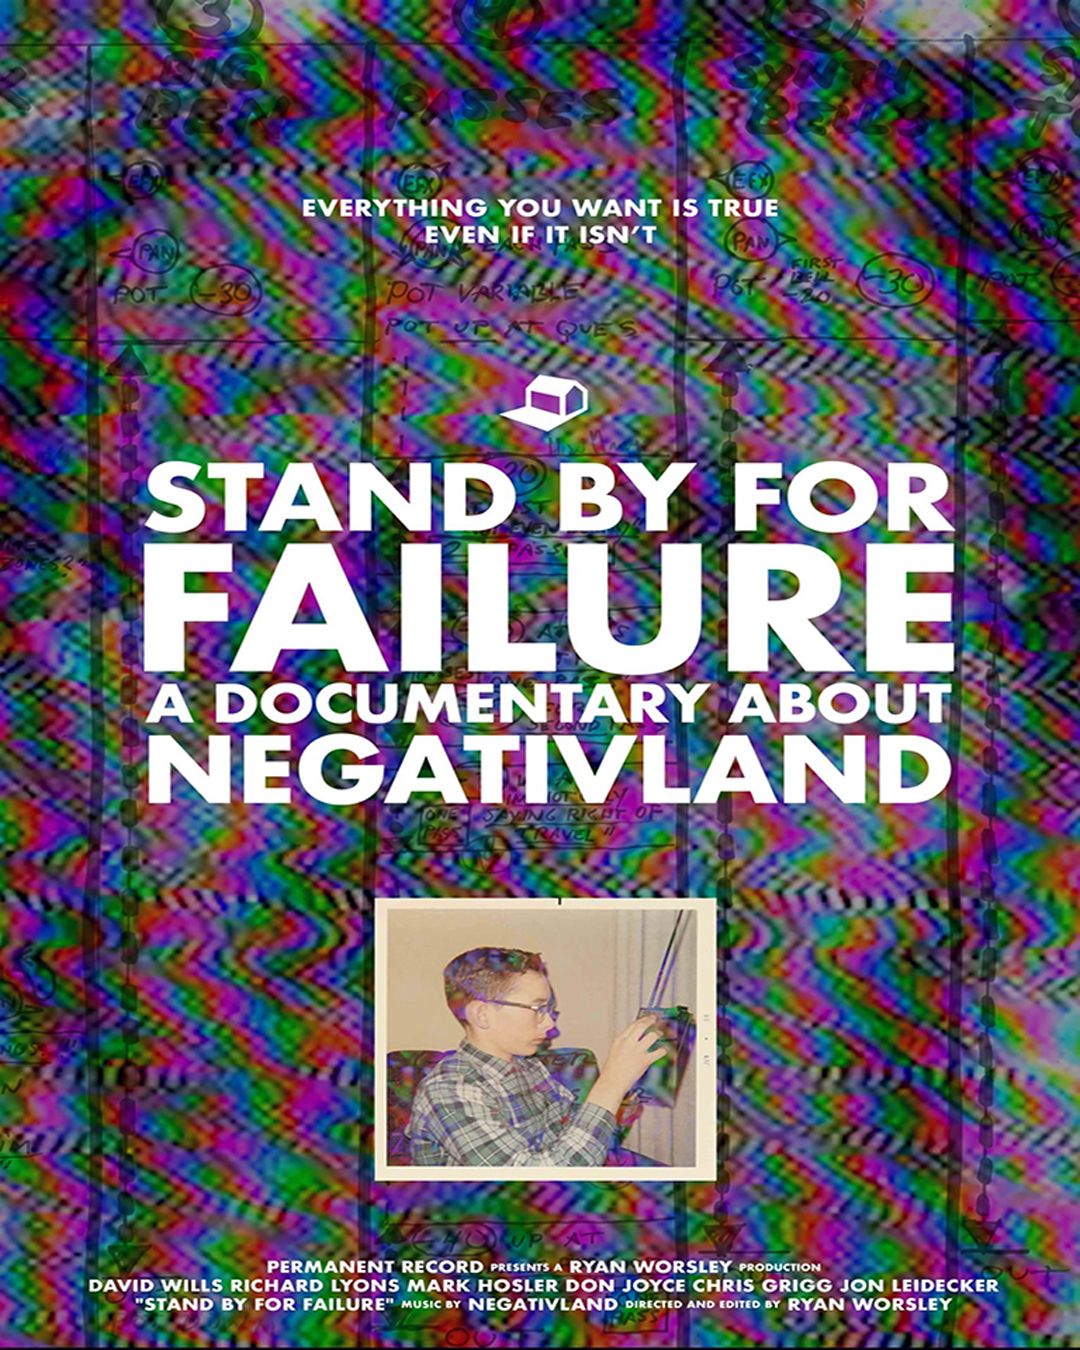 andmoreagain presents Negativland Live Double-Feature: "WE CAN REALLY FEEL LIKE WE\u2019RE HERE"